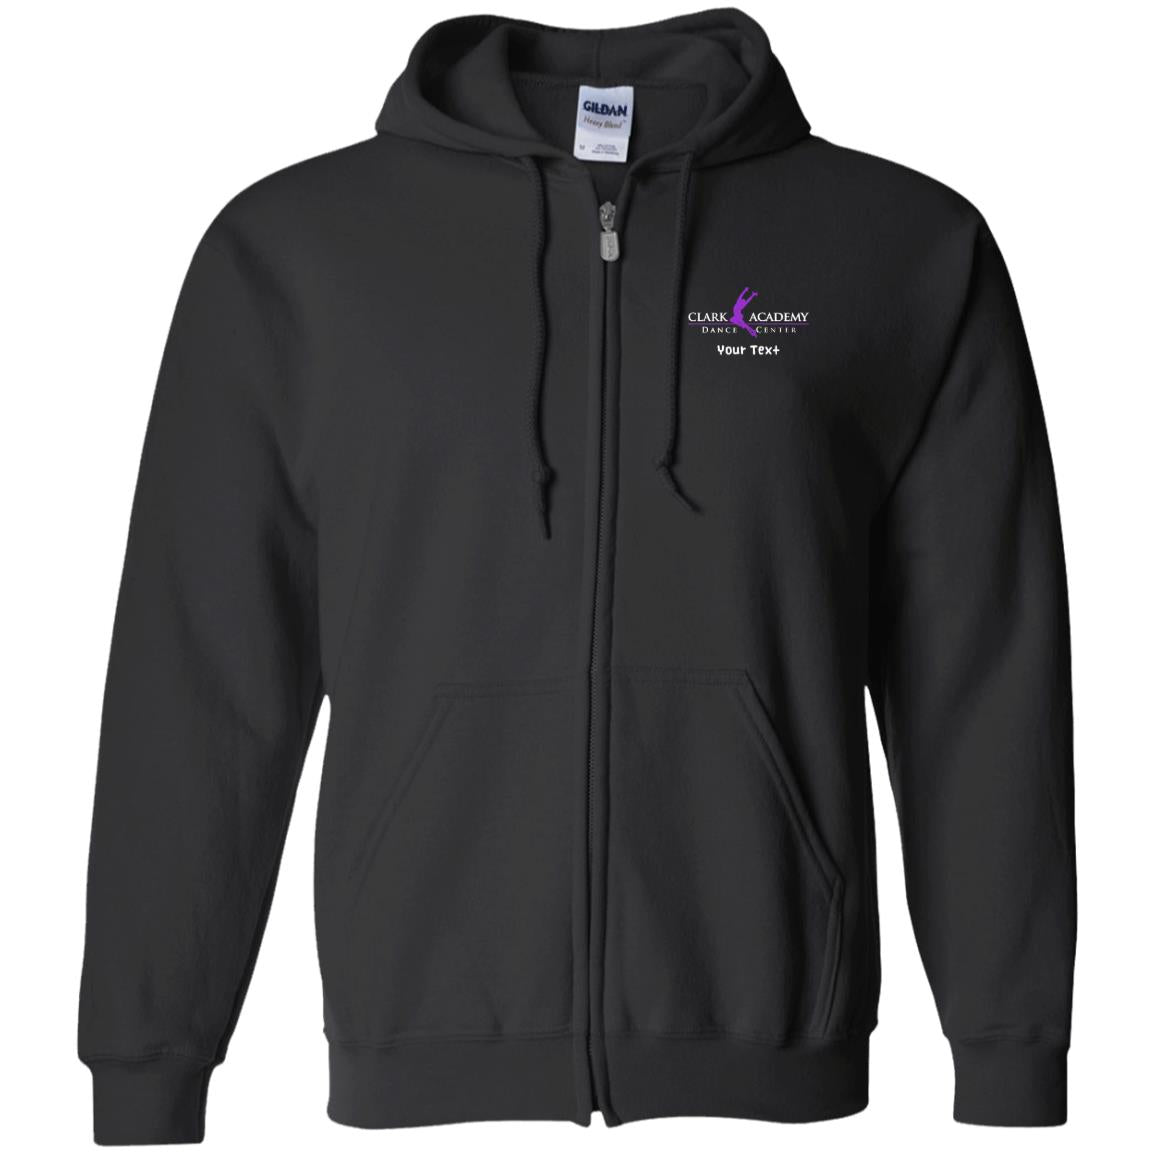 CADC Zip Up Hooded Sweatshirt - With Personalization